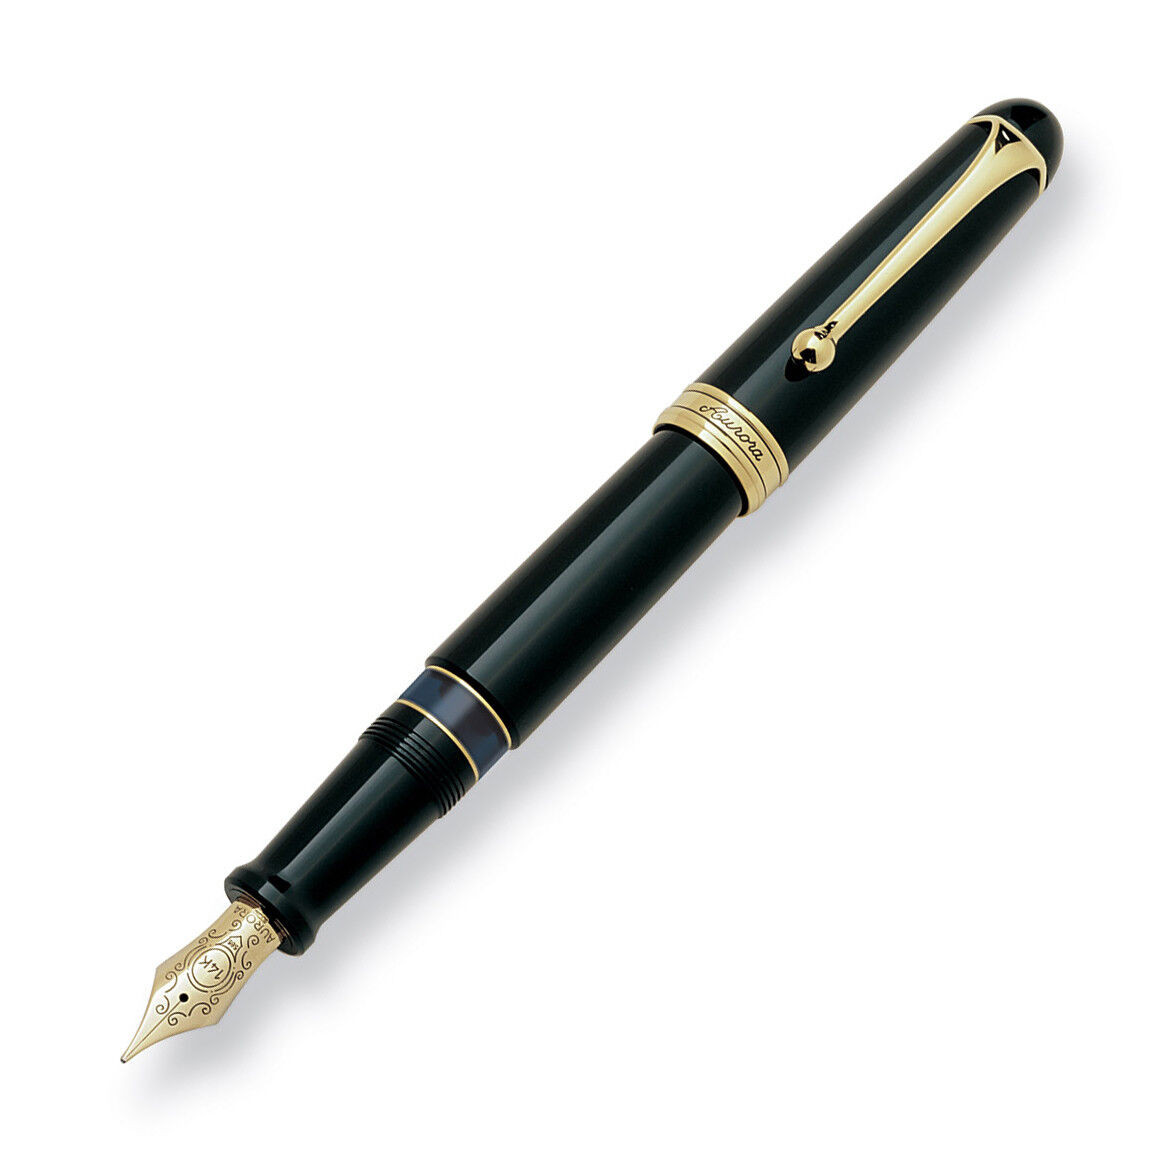 Aurora 88 Gold Plated Fountain Pen - Black Resin - Large Fine Point - New 800-F